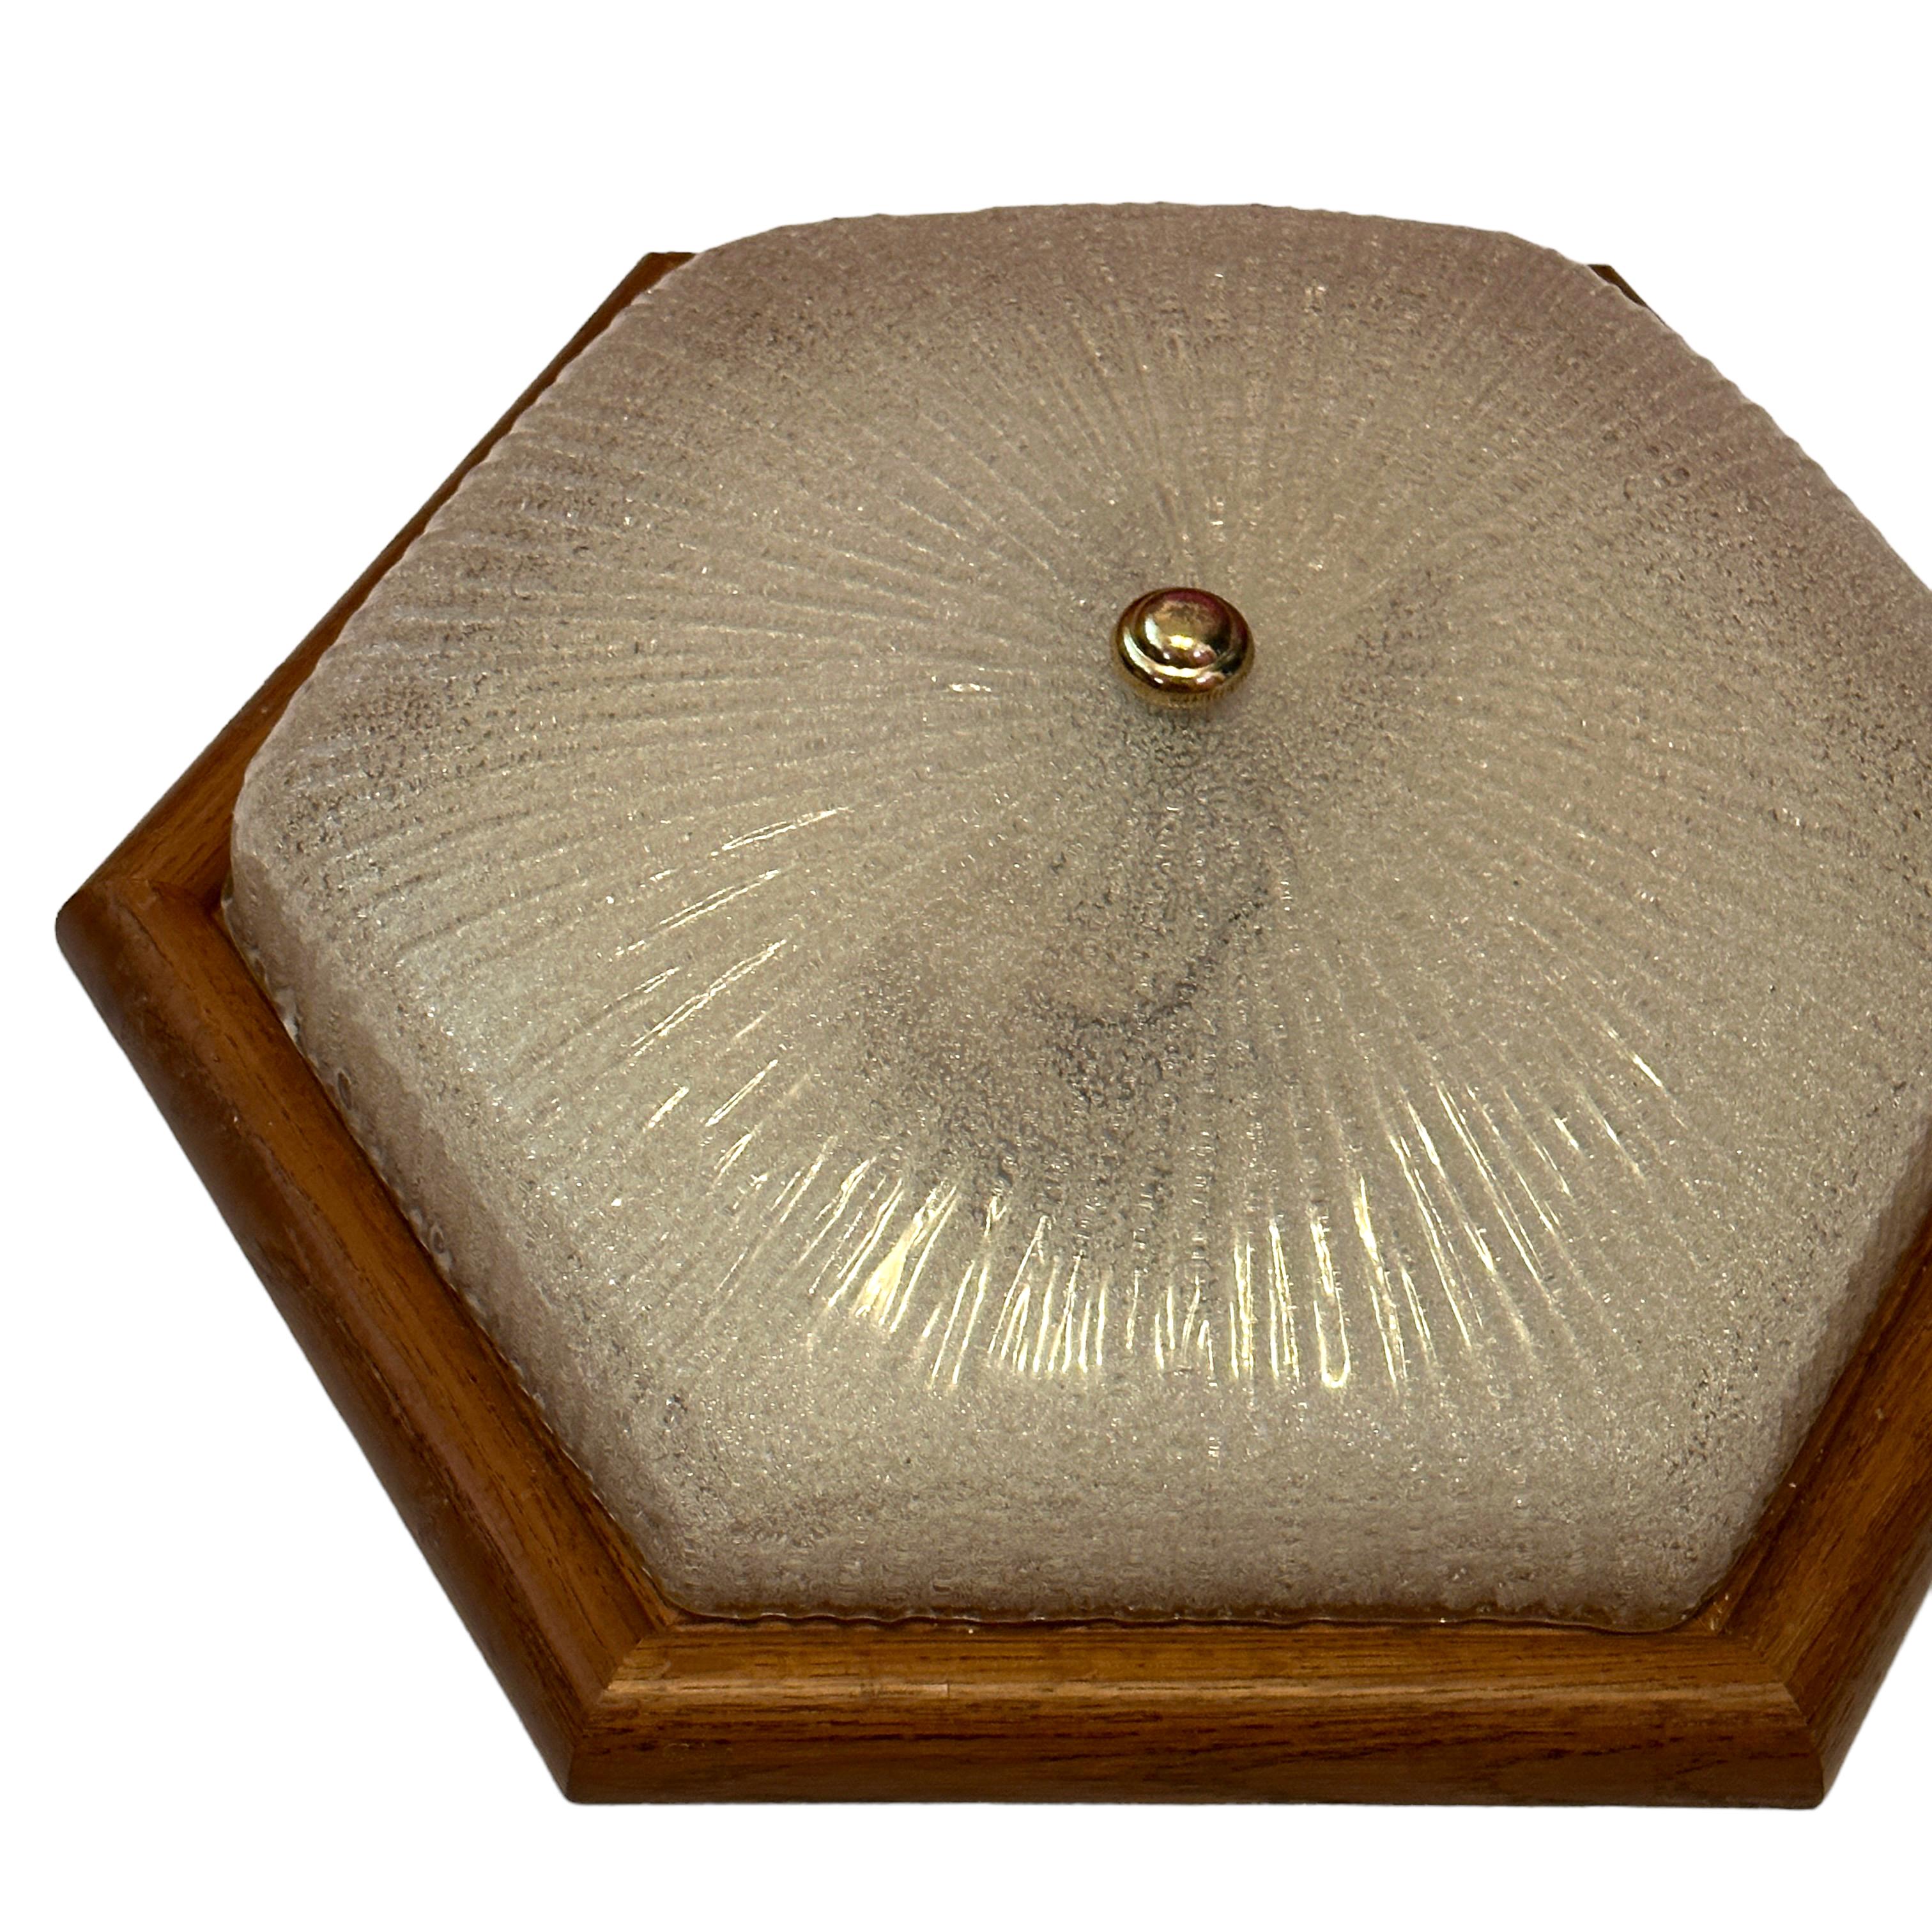 A beautiful ice glass flush mount. Made in Germany in the 1970s. Gorgeous textured glass flush mount with metal fixture and a wooden frame. The Fixture requires two European E27 / 110 Volt Edison bulbs, each bulb up to 60 watts. A nice addition to